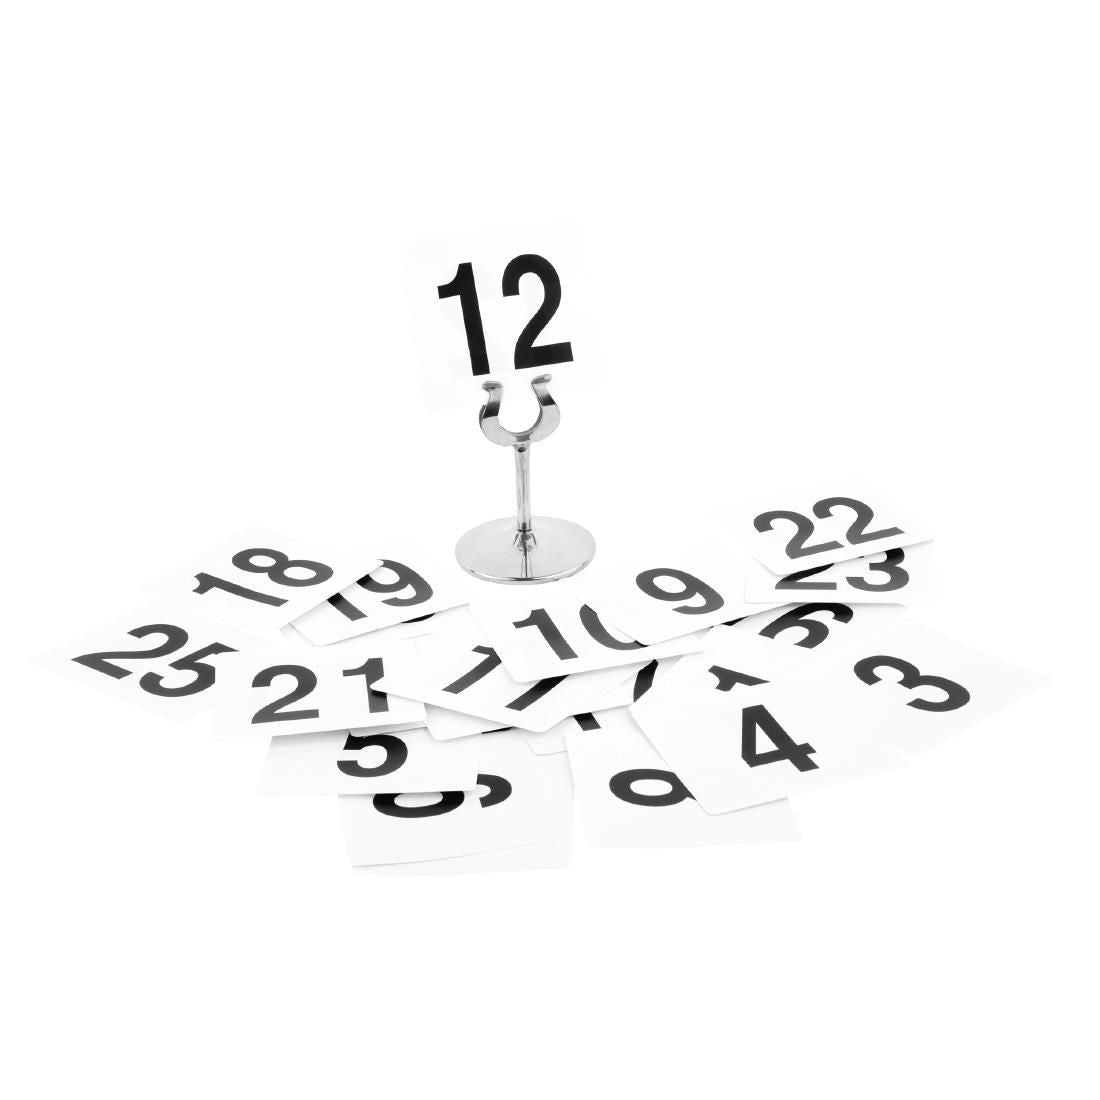 GC086 Plastic Table Numbers Inserts 1-25 JD Catering Equipment Solutions Ltd